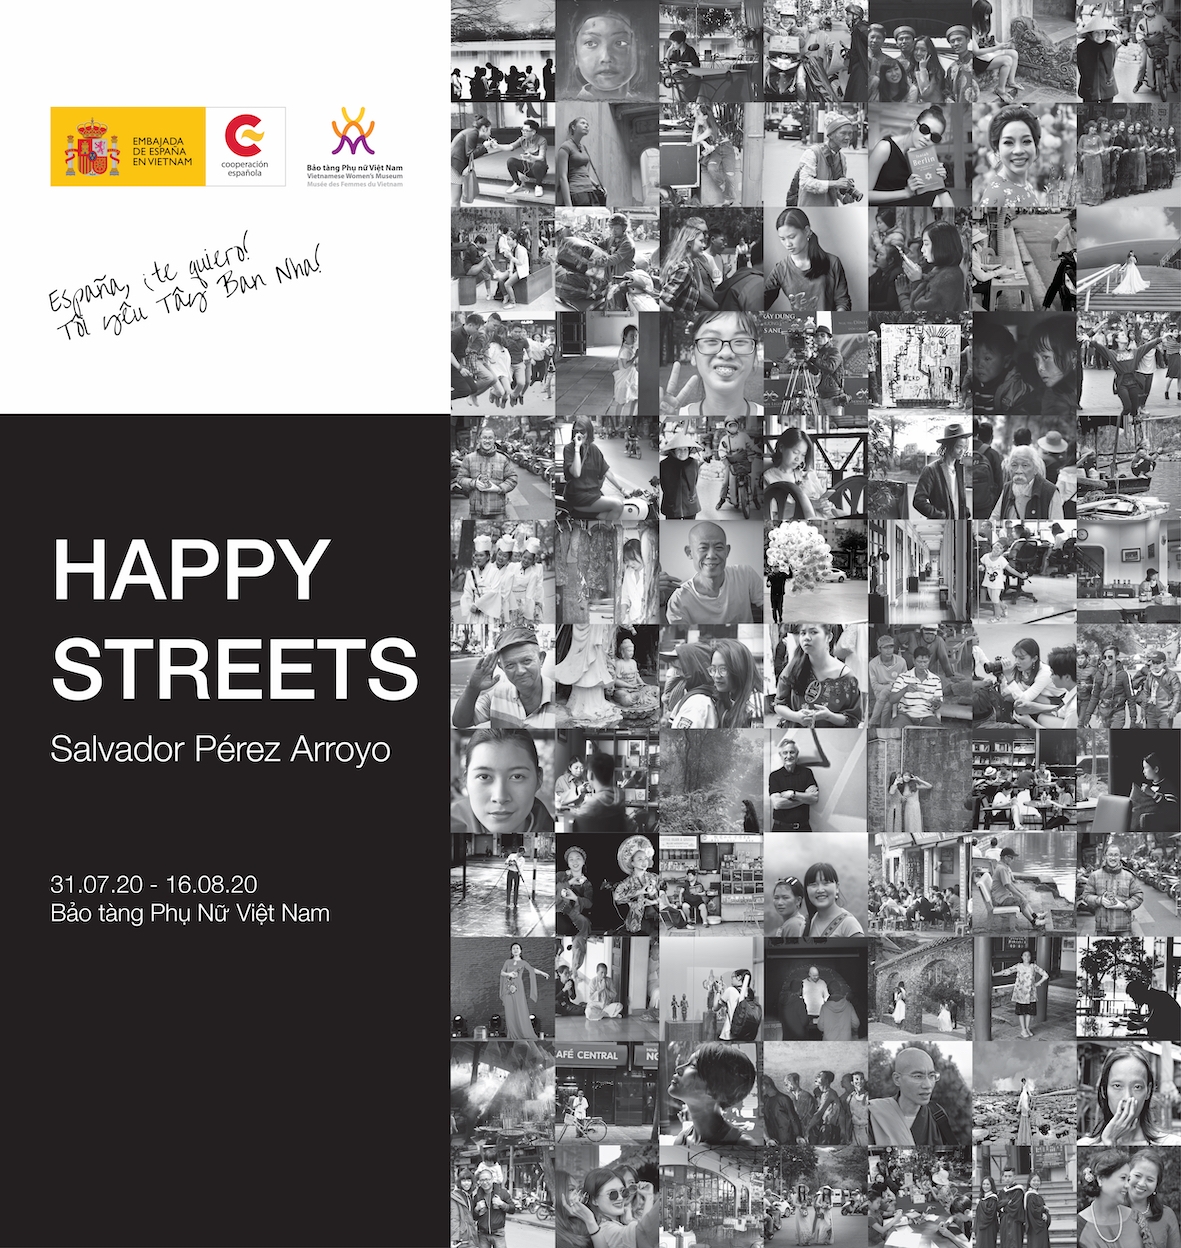 "Happy streets", the photo exhibition by famous Spanish architect in Vietnam on July 31